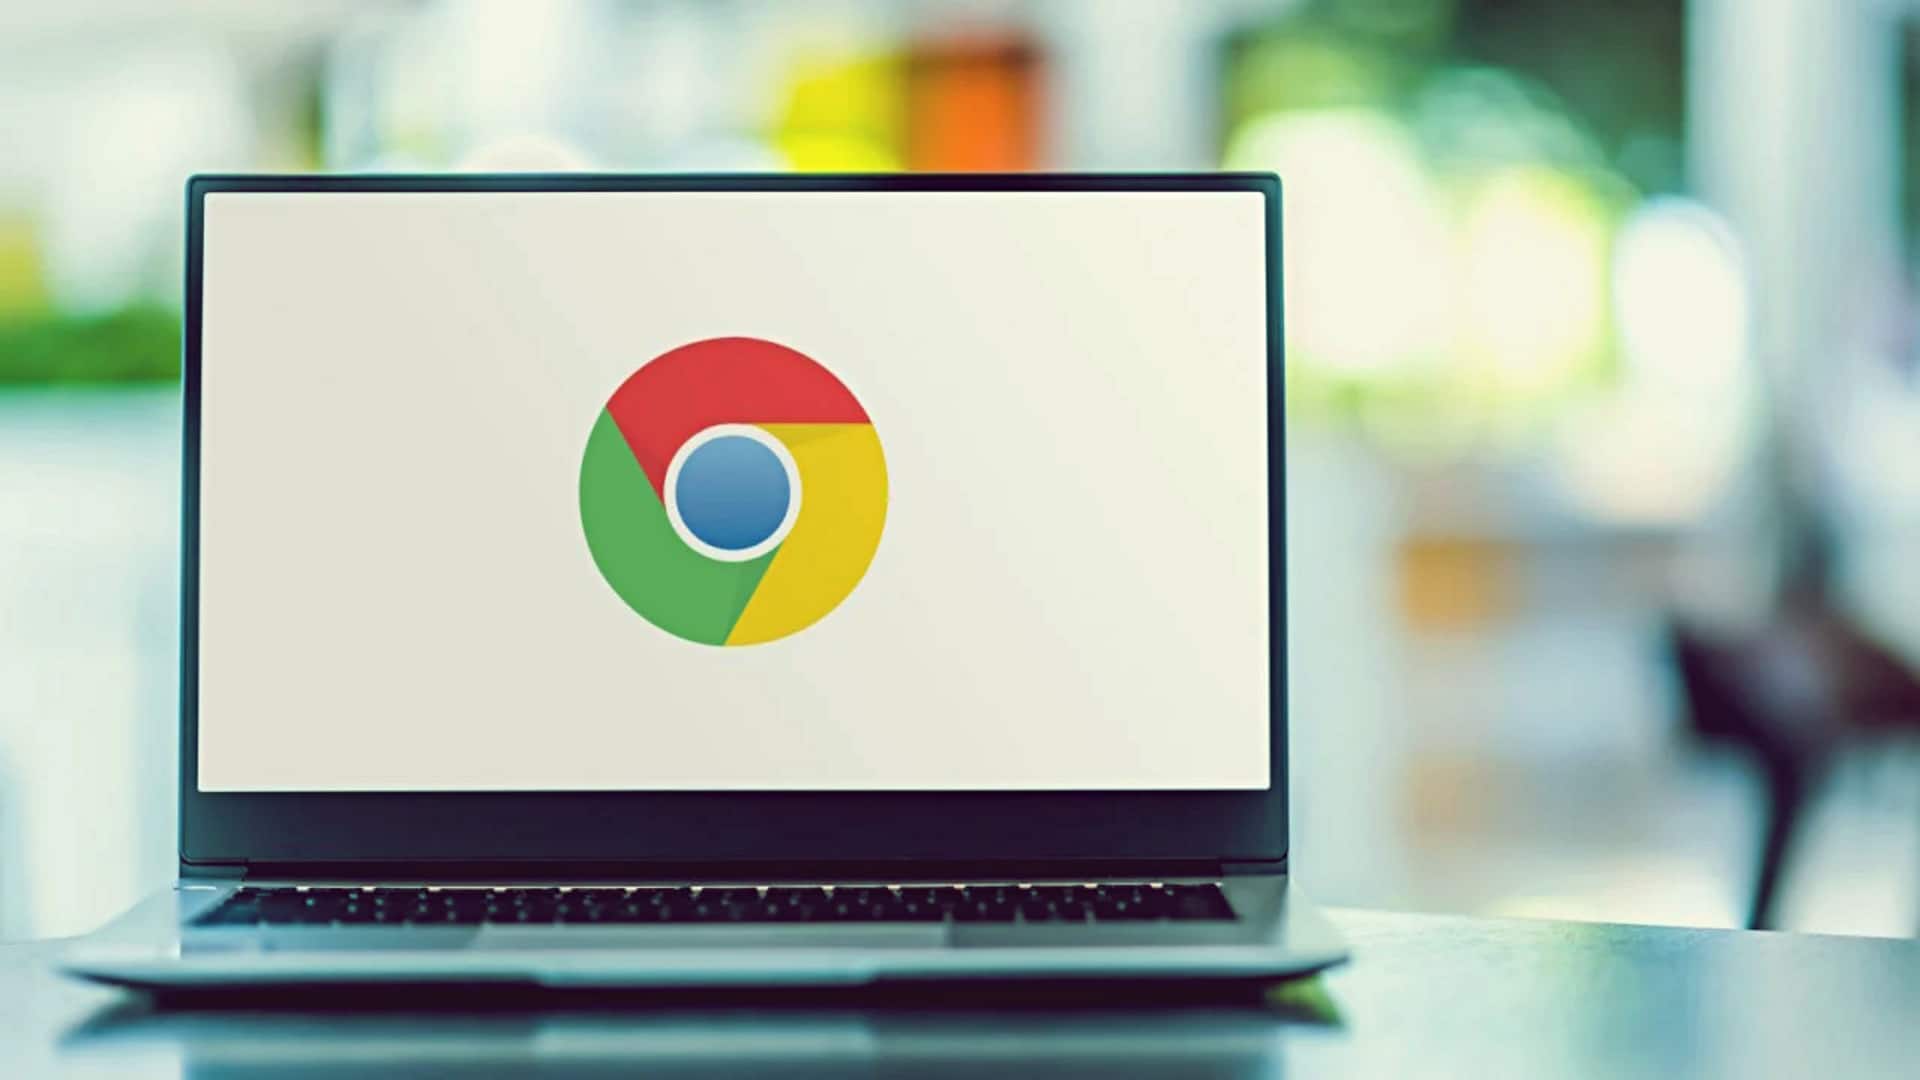 Google Chrome enhances Safe Browsing with real-time protection against malware